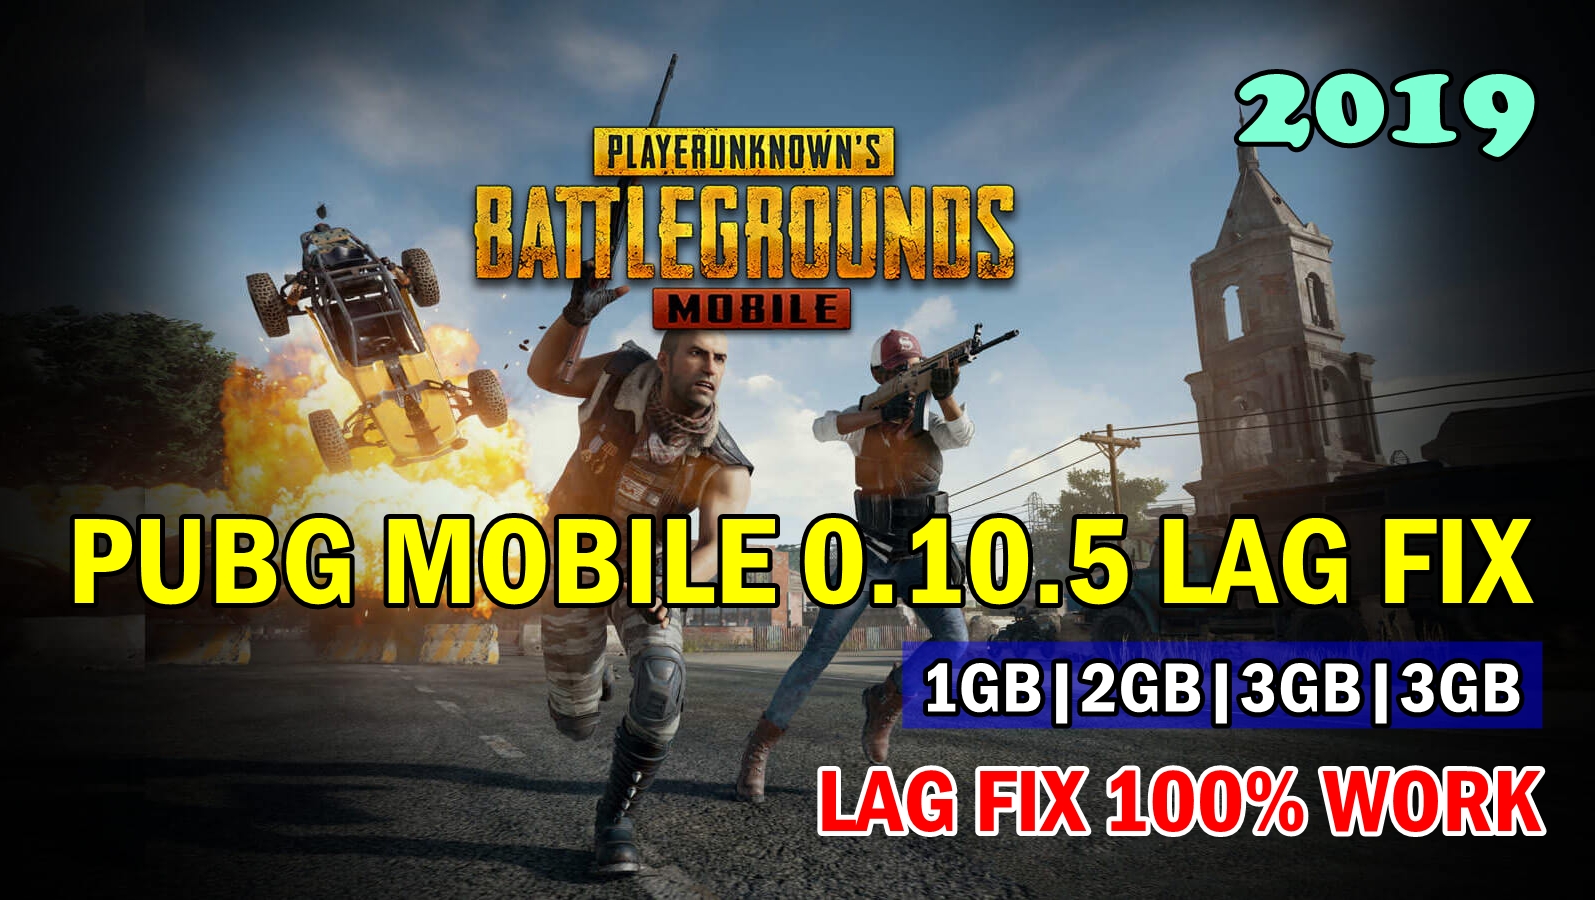 Download failed because the resources could not be found pubg mobile фото 100